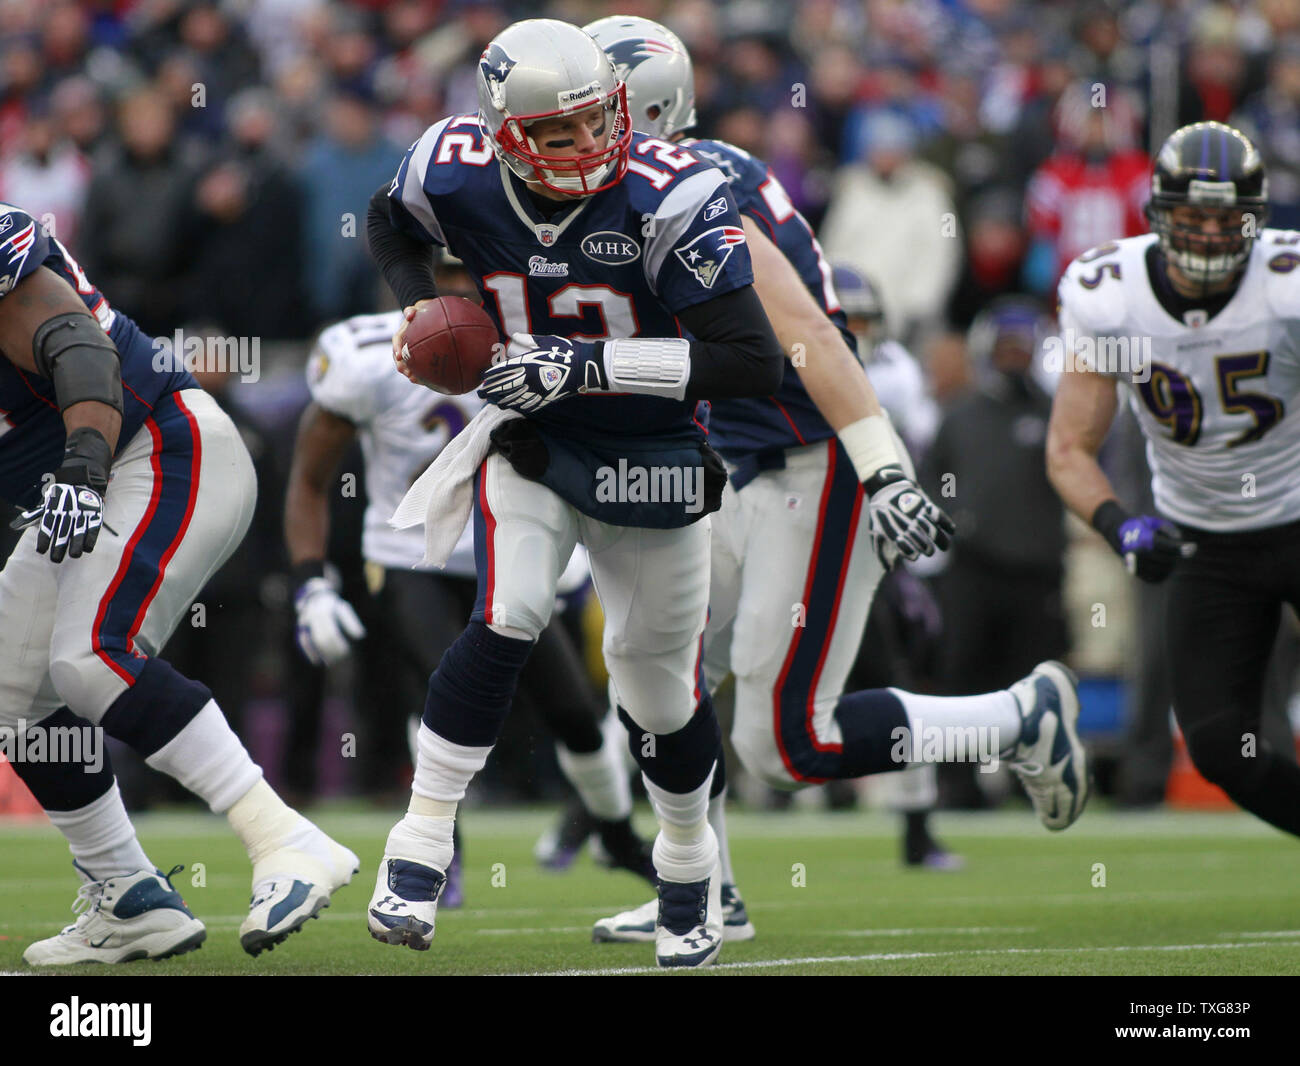 New England Patriots quarterback Tom Brady (12) rolls out for a hand off in the first quarter of the AFC Championship game against the Baltimore Ravens at Gillette Stadium in Foxboro, Massachusetts on January 22, 2012.   UPI/Matthew Healey Stock Photo